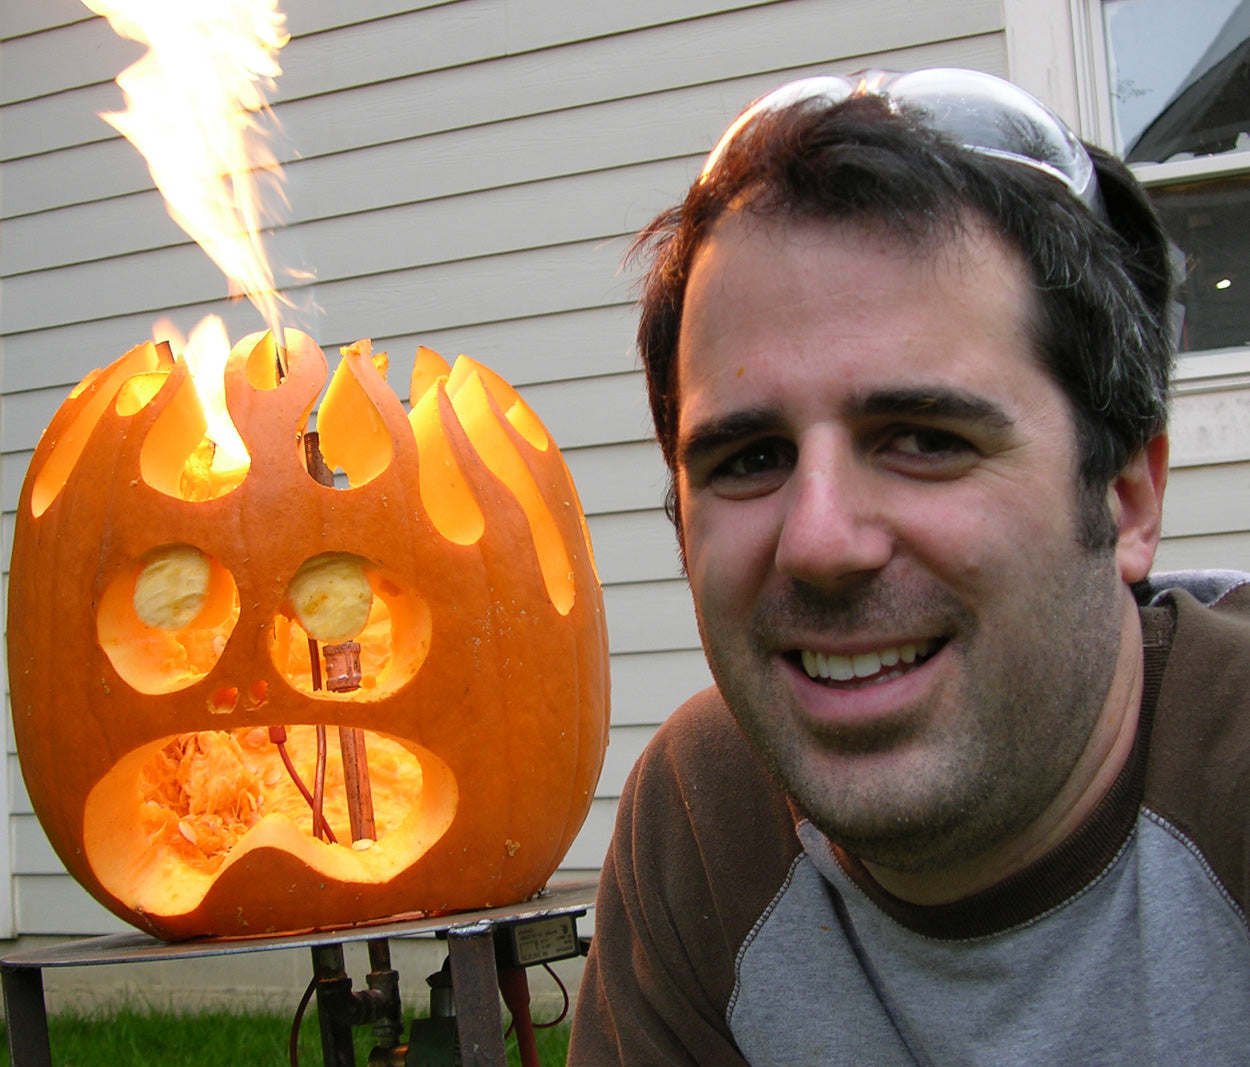 Pumpkin Carver for Hire - How To Hire Me for Your Event